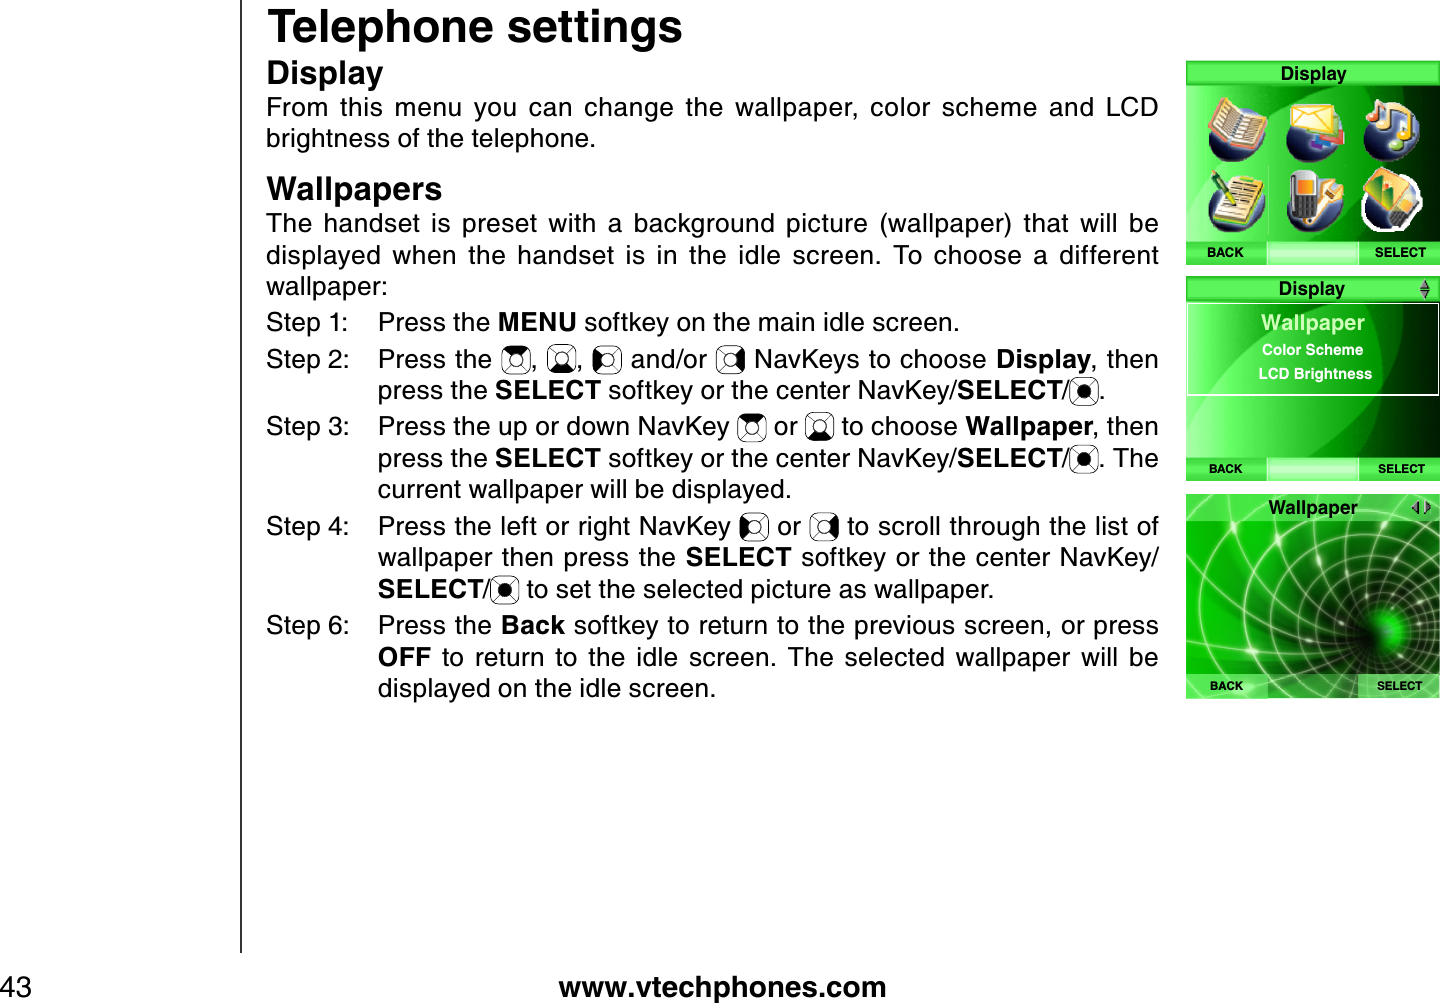 www.vtechphones.com43Telephone settingsD isplayF rom  this  menu  you  can  change  the  wallpaper,  color  scheme  and  L C D brightness of the telephone.W allpapersThe  handset  is  preset  with  a  background  picture  (wallpaper)  that  will  be displayed  when  the  handset  is  in  the  idle  screen.  To  choose  a  different wallpaper:Step 1: Press the MENU softkey on the main idle screen.Step 2: Press the  , ,  and/or   NavKeys to choose D isplay, then press the SELECT softkey or the center NavKey/SELECT/.Step 3: Press the up or down NavKey   or   to choose W allpaper, then press the SELECT softkey or the center NavKey/SELECT/. The current wallpaper will be displayed.Step 4: Press the left or right NavKey   or   to scroll through the list of wallpaper then press the SELECT softkey or the center NavKey/SELECT/ to set the selected picture as wallpaper. Step 6: Press the Back softkey to return to the previous screen, or press OFF  to  return  to  the  idle  screen.  The  selected  wallpaper  will  be displayed on the idle screen.SELECTDisplayBACKBACK SELECTW allpaperColor SchemeLCD Brightness  DisplayWallpaperBACK SELECT